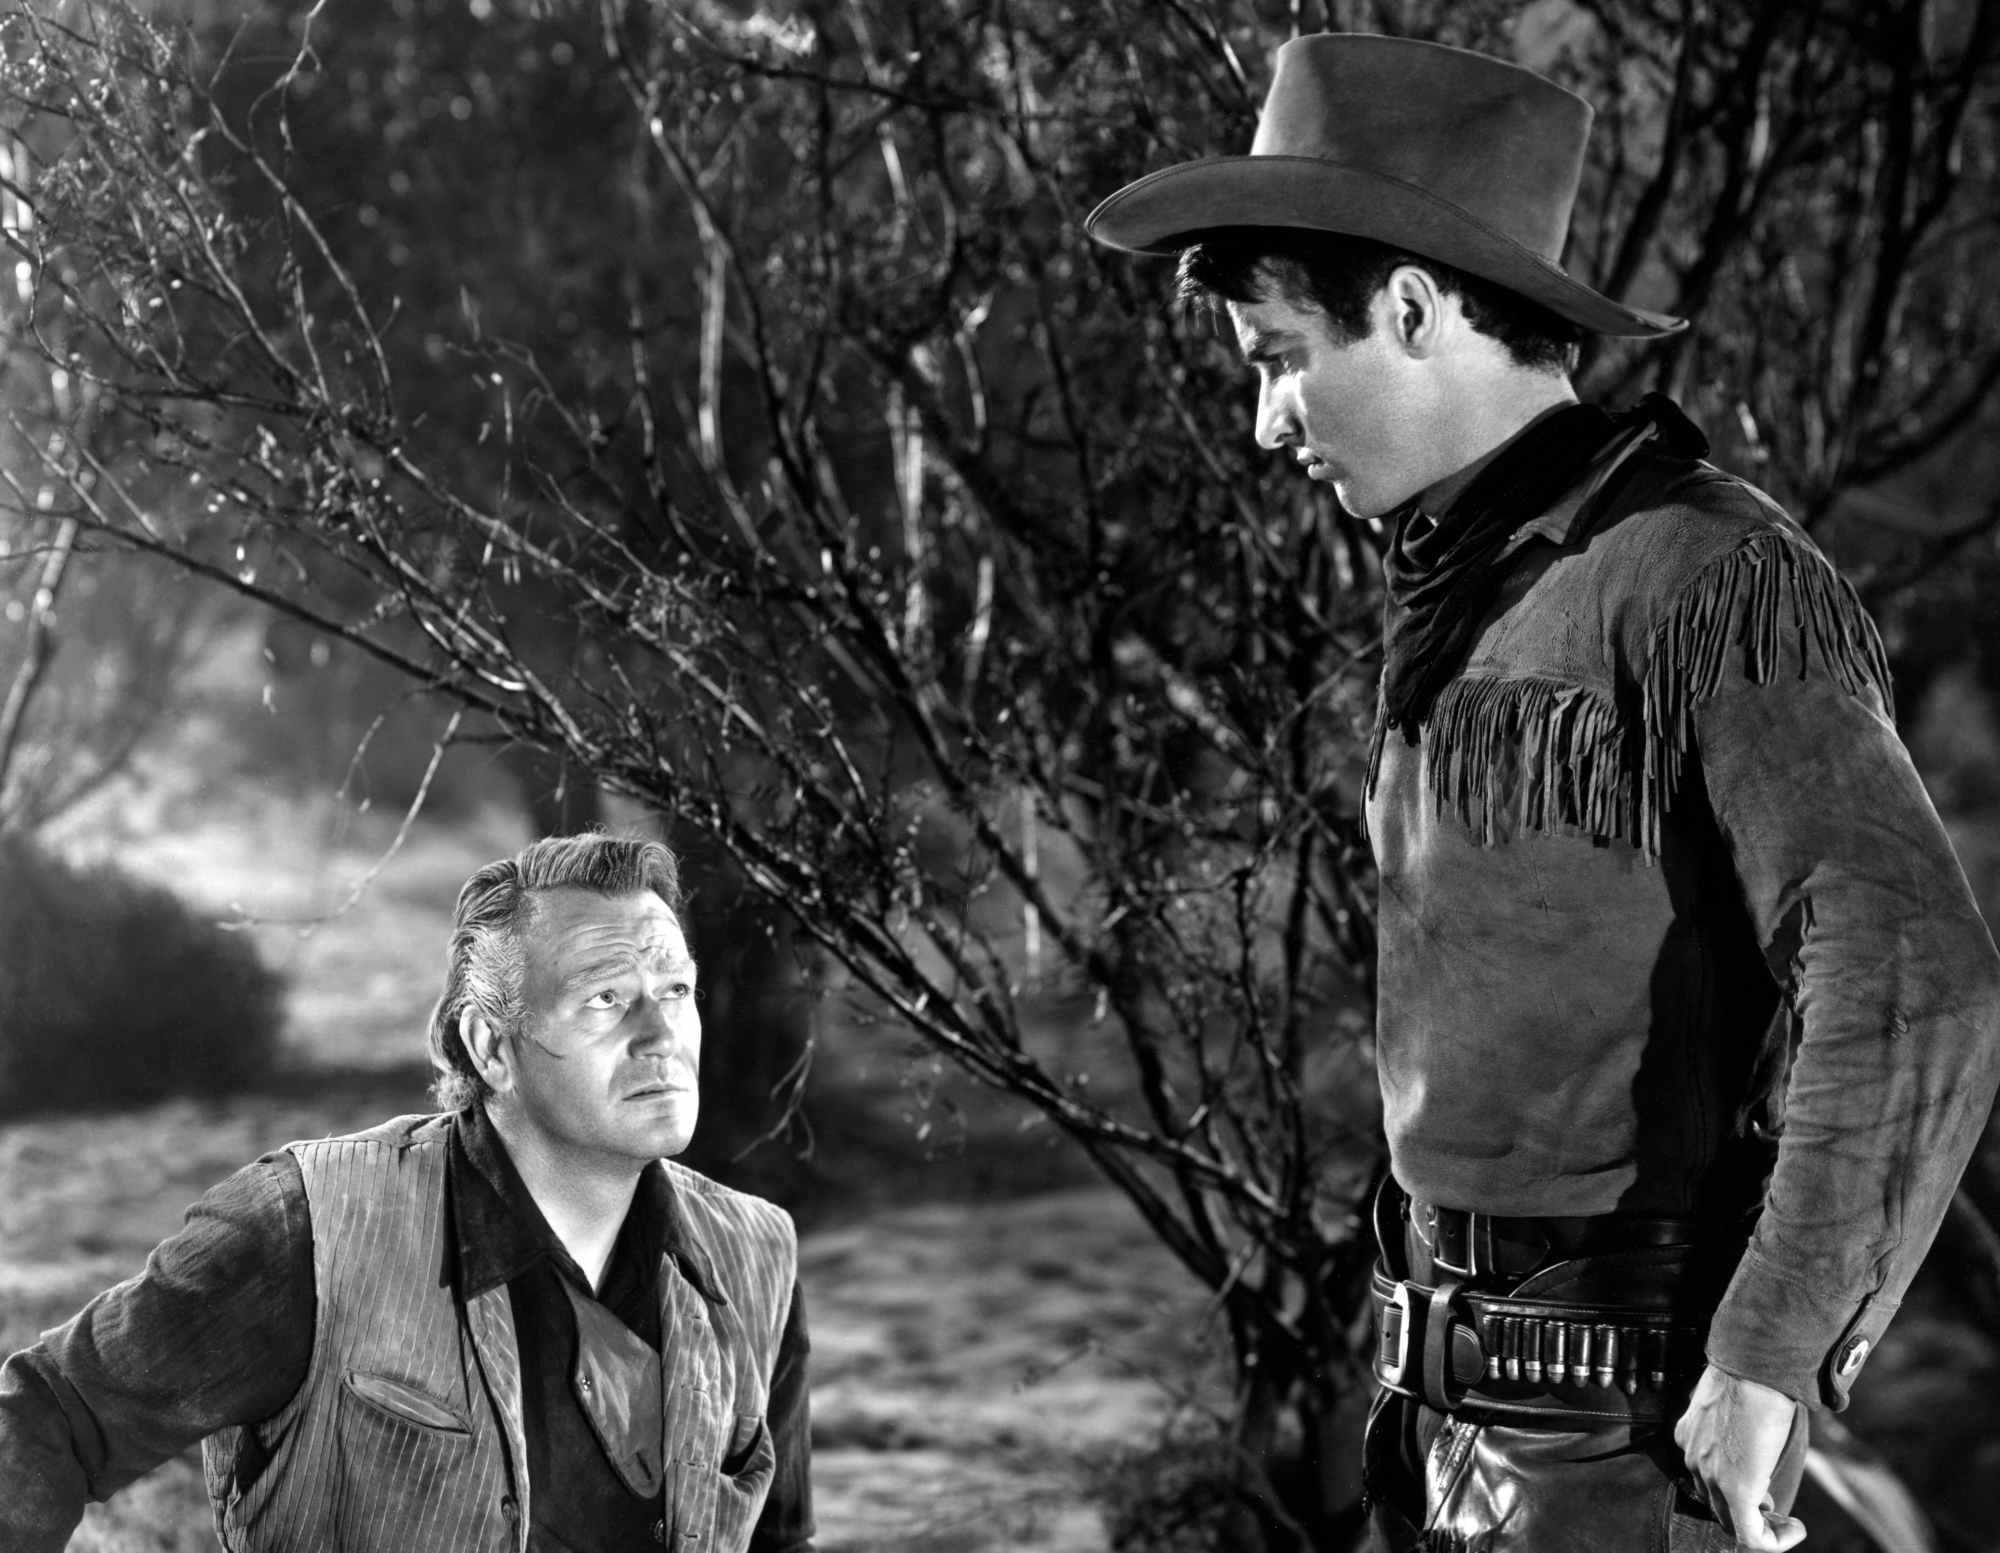 John Wayne Taught Montgomery Clift How to Fistfight on ‘Red River’